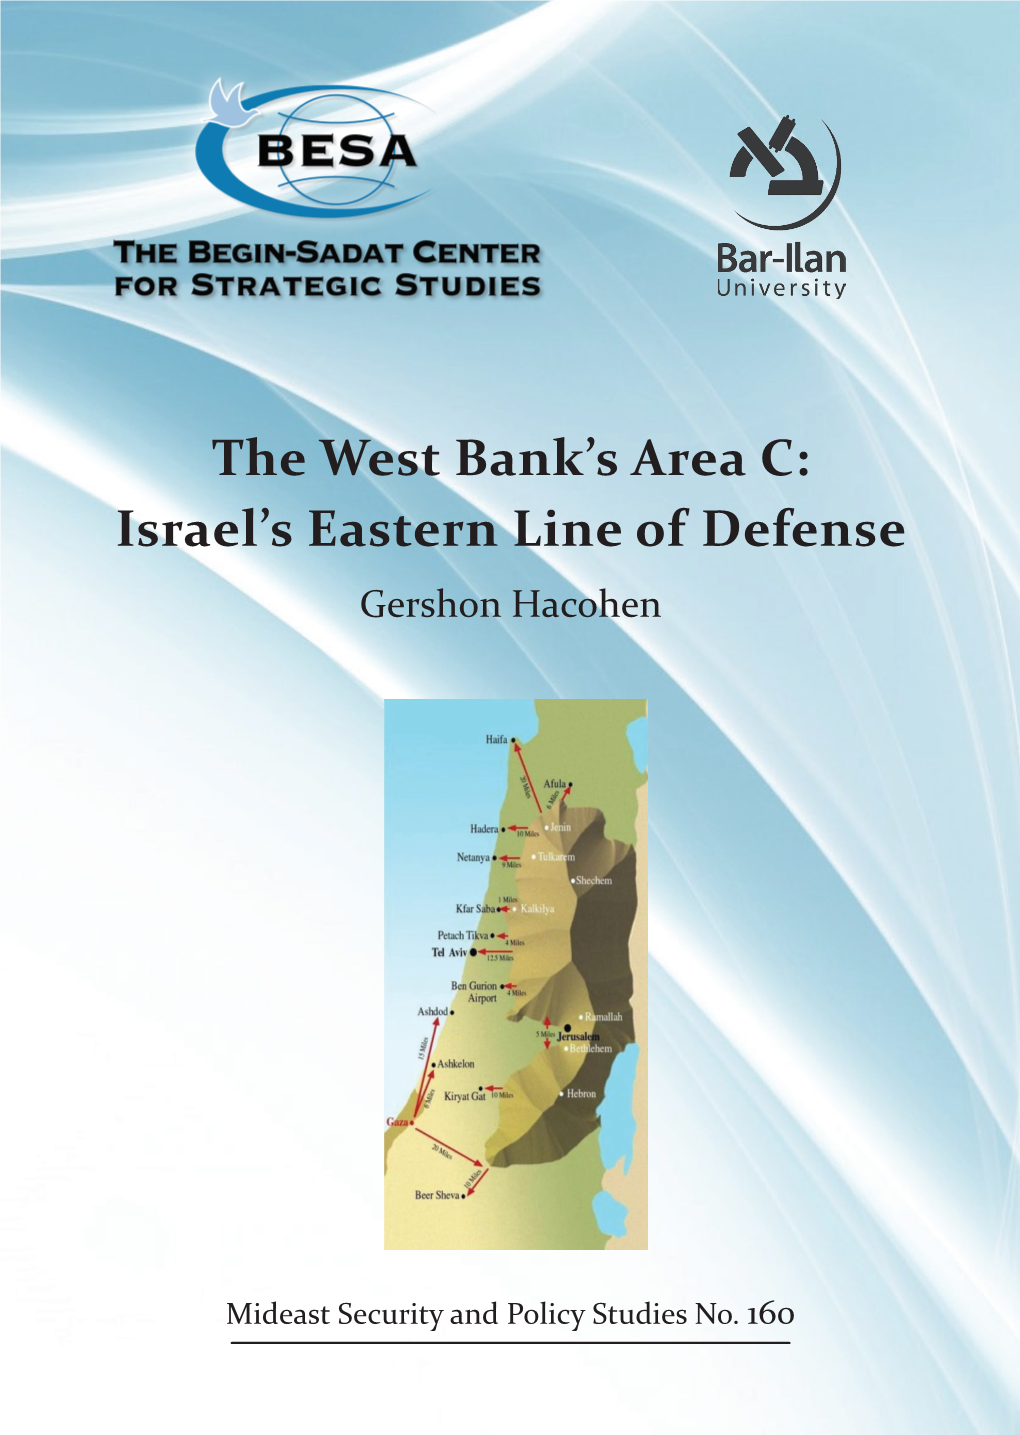 The West Bank's Area C